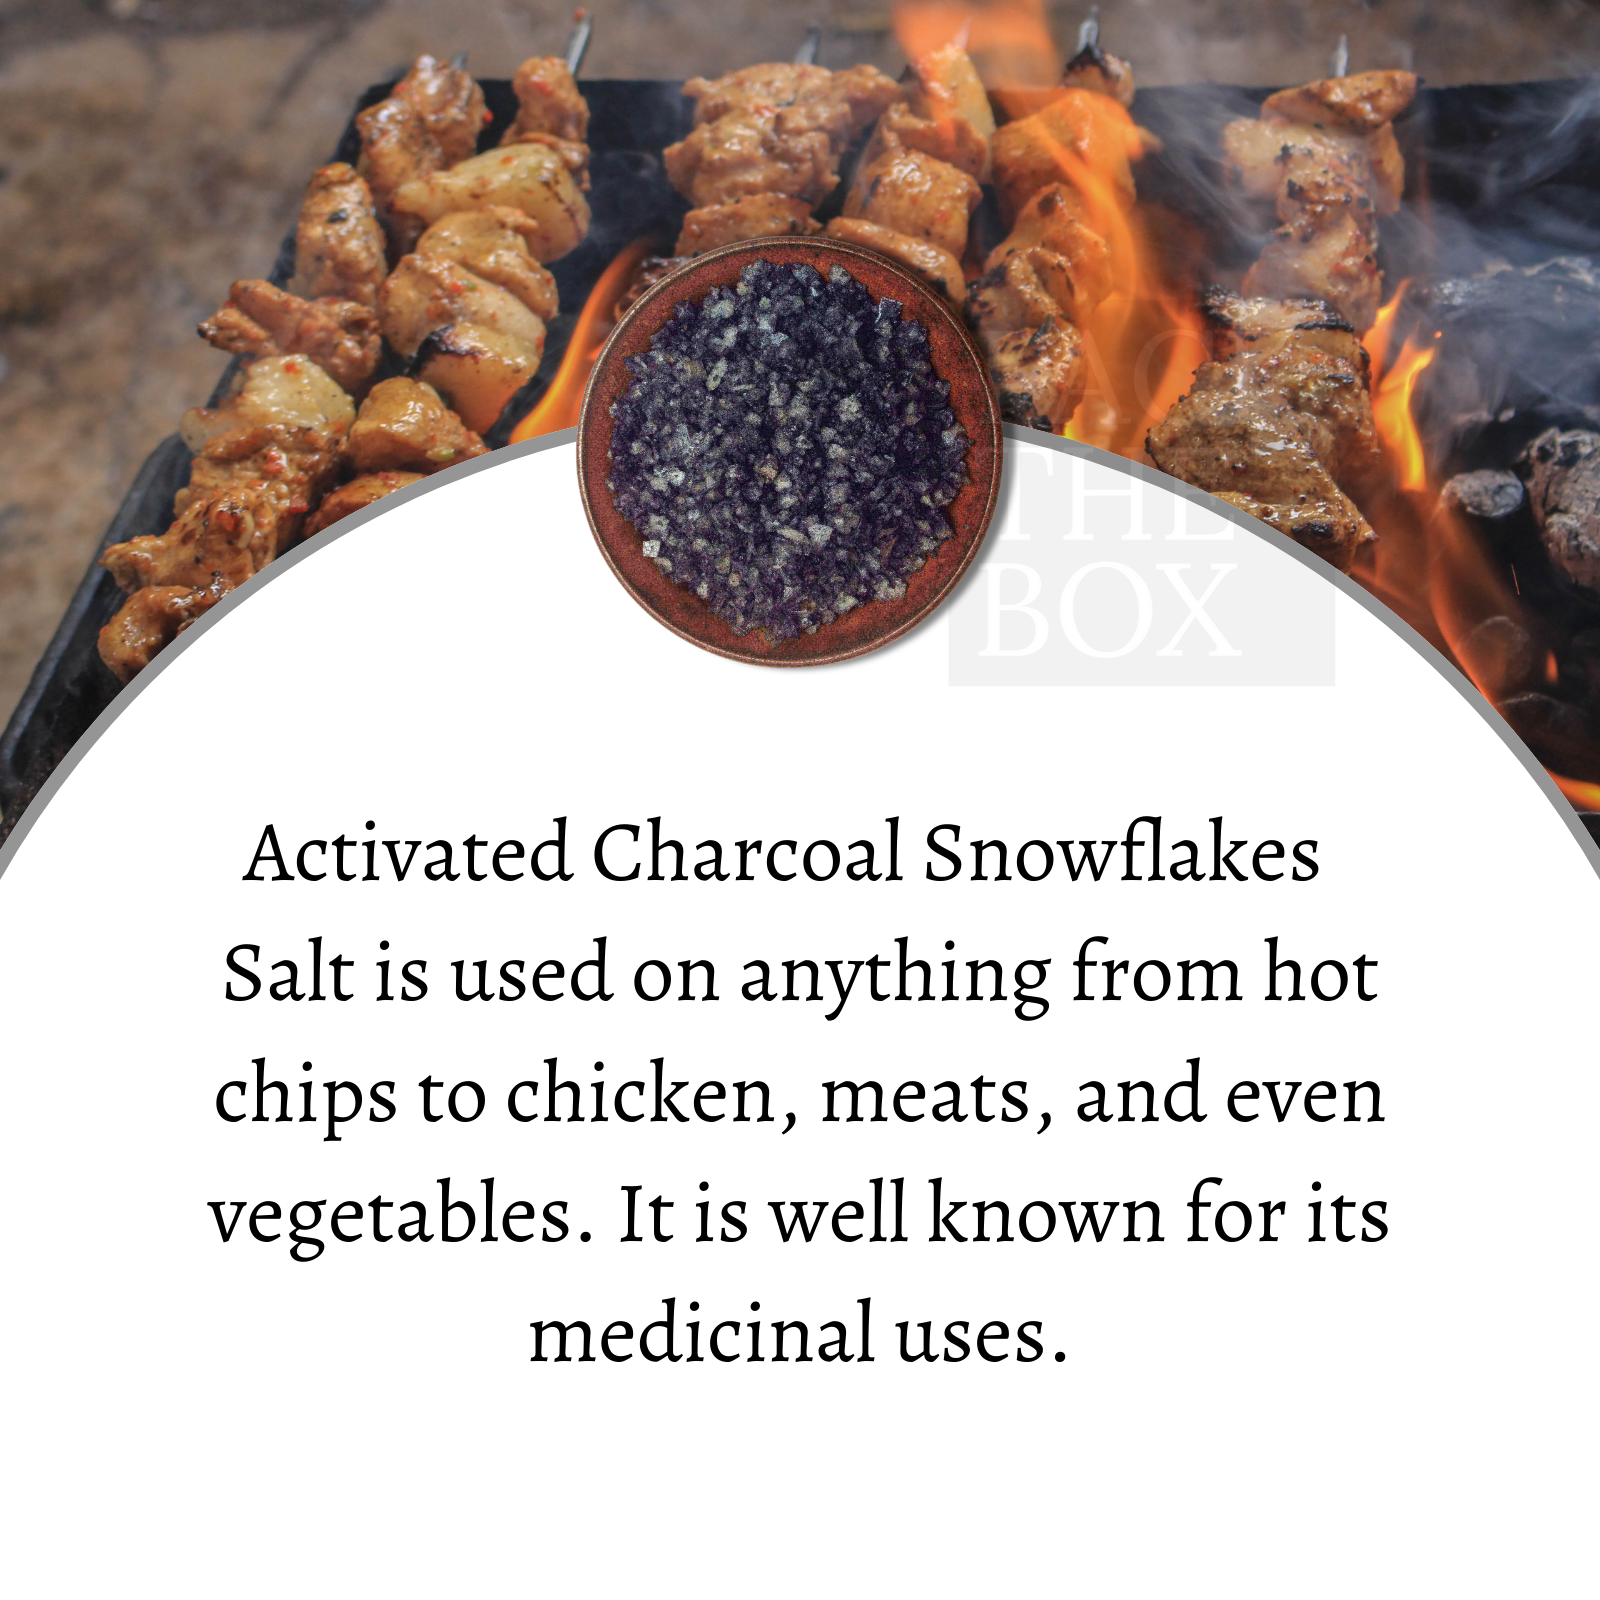 Baker & Baker Gourmet Snowflake Salt Activated Charcoal has wide uses in both medicinal, cosmetic and cooking purposes.